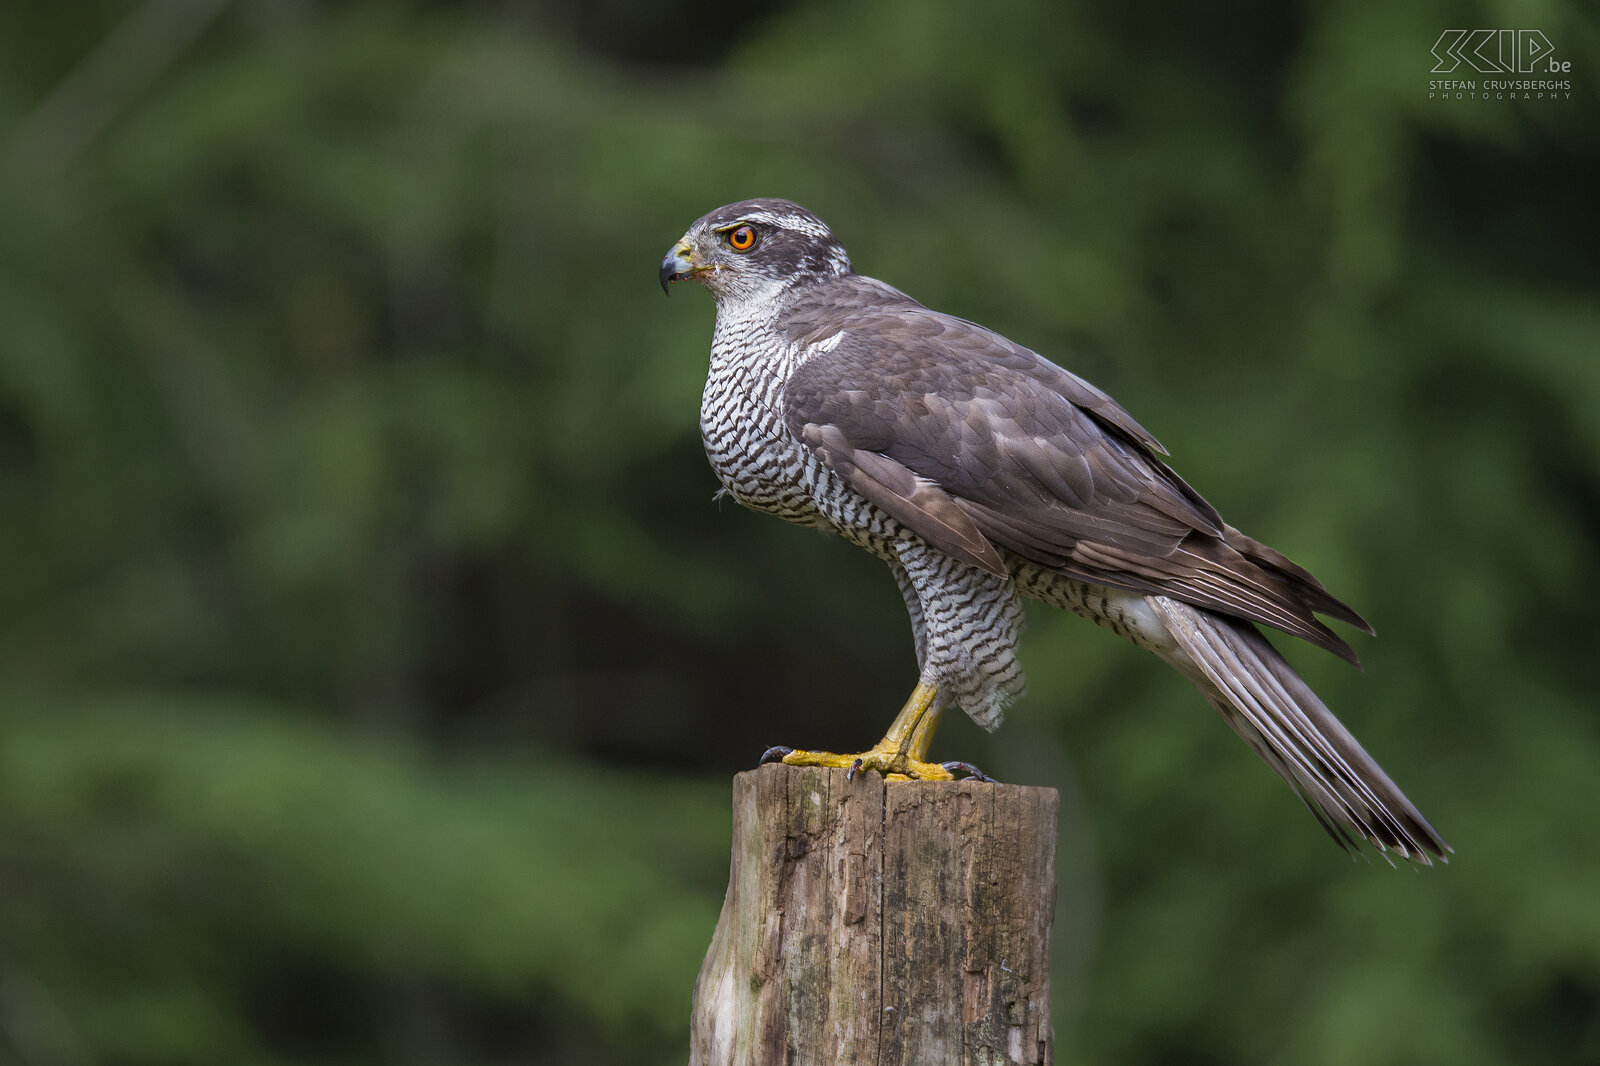 Birds of prey - Northern goshawk The Northern goshawk (Accipiter gentilis) is mainly found in forest areas and usually hunts from a branch in a tree. Their main preys are pigeons, jays, crows and rabbits.  Stefan Cruysberghs